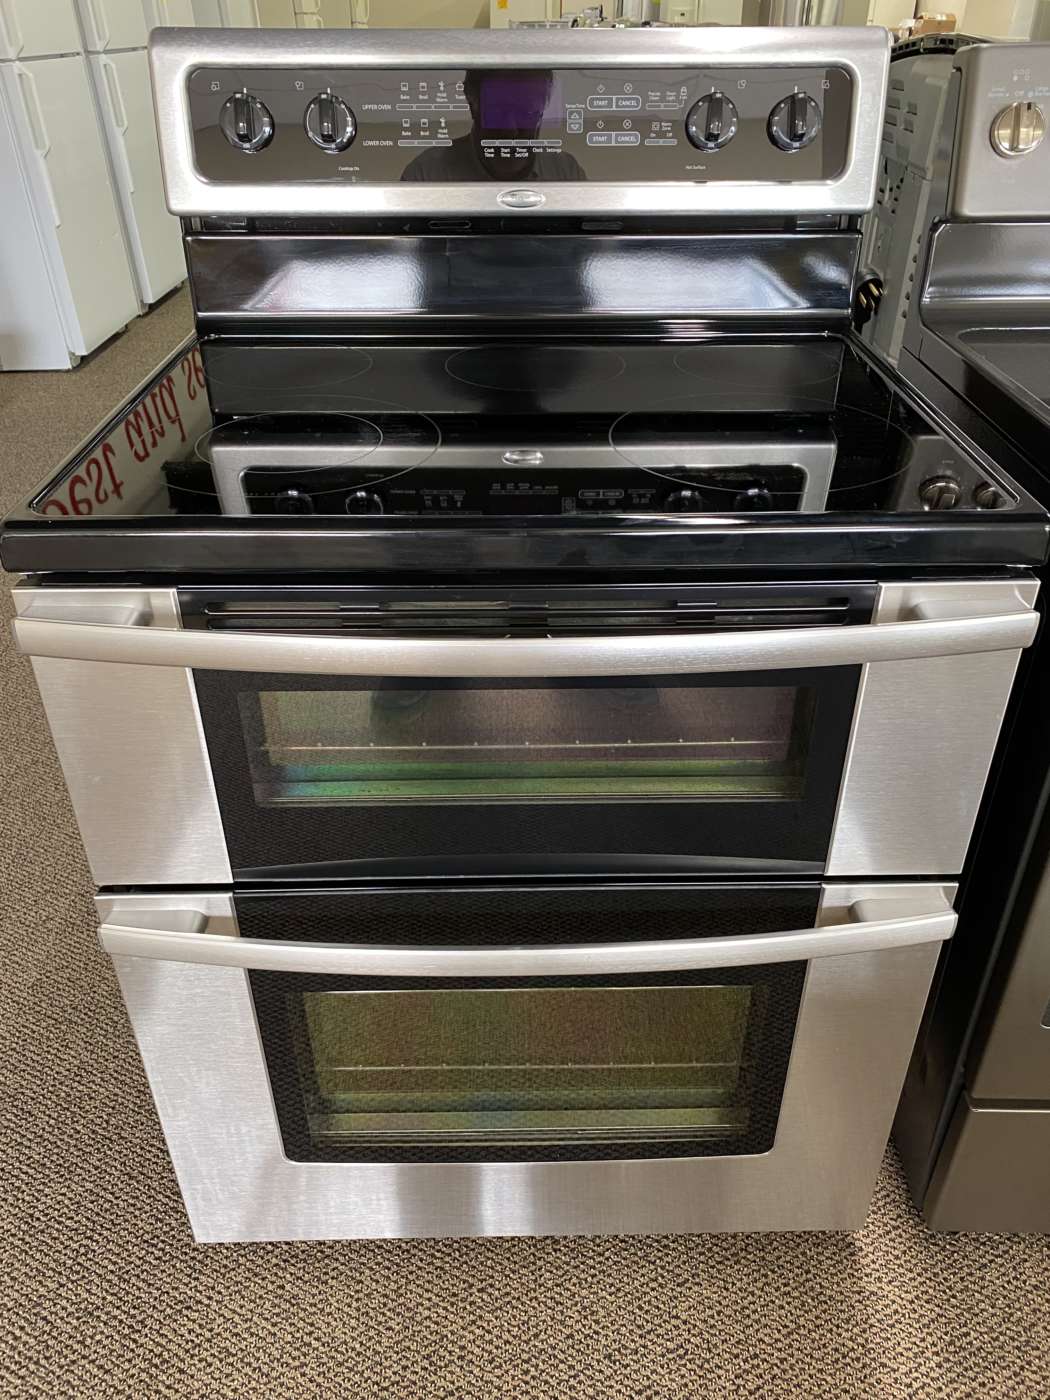 Reconditioned WHIRLPOOL Self-Clean Double-Oven Electric Range – Stainless